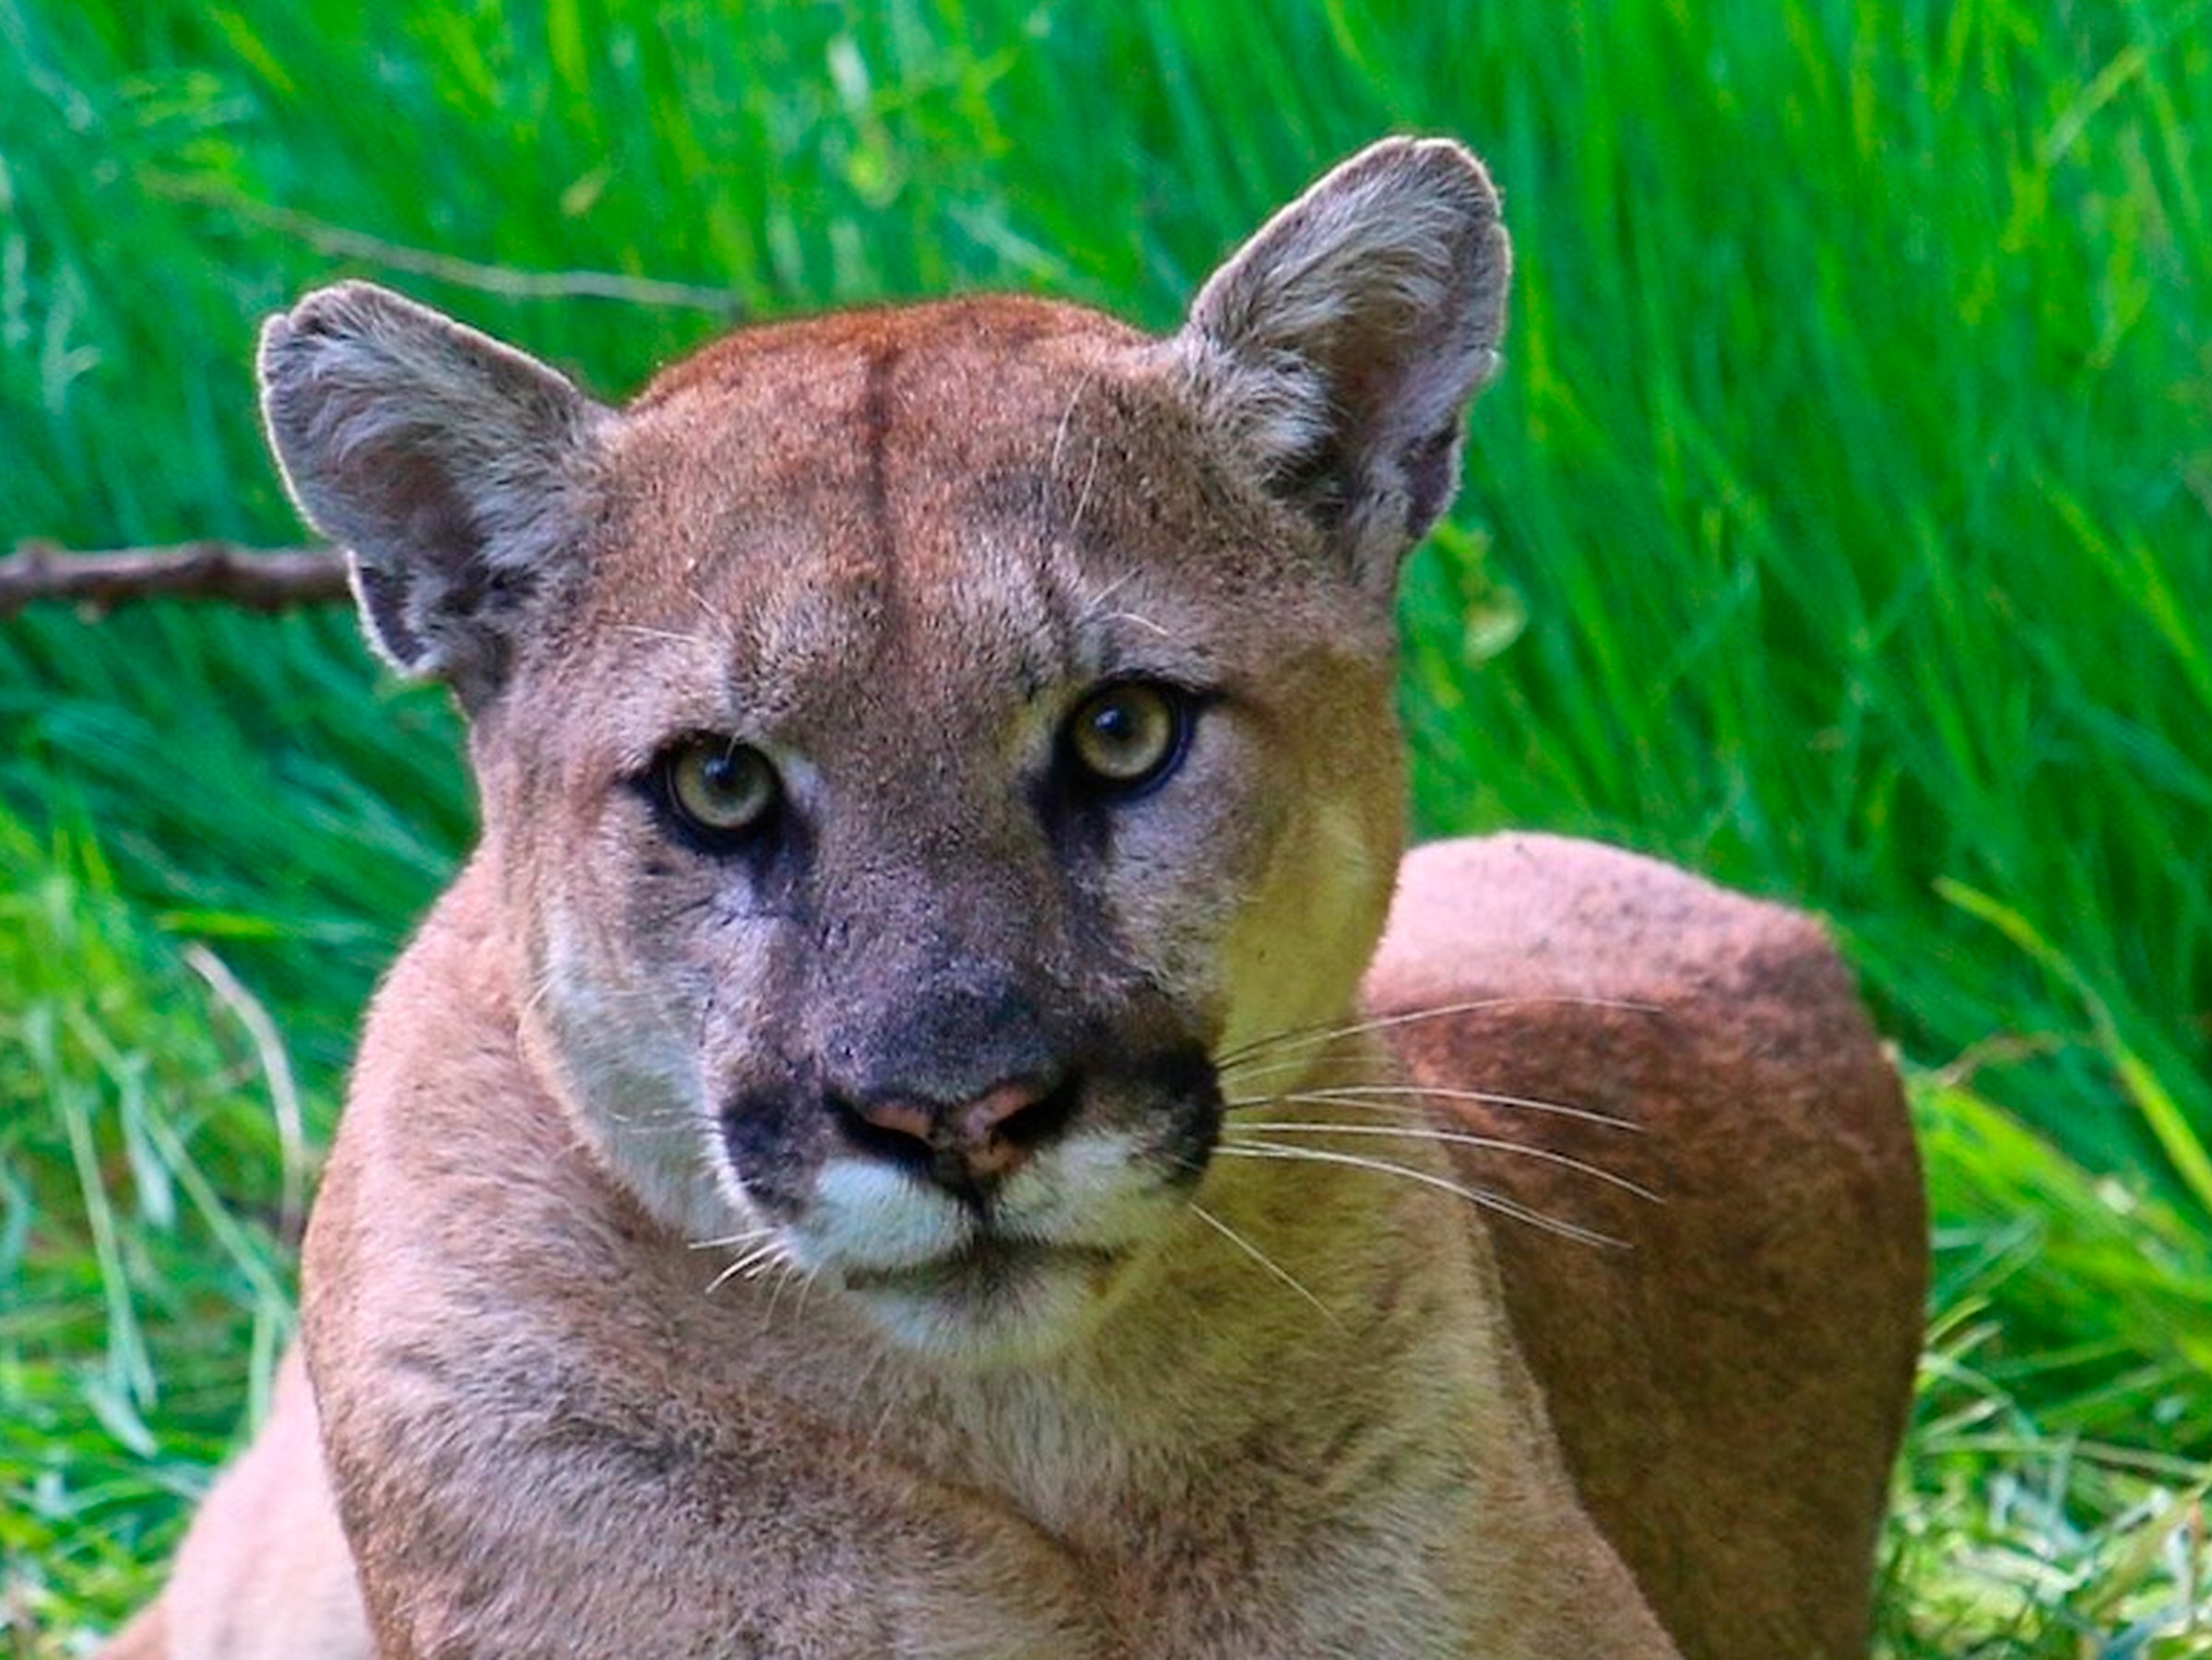 File photo: This undated photo provided by the U.S. National Park Service shows a mountain lion known as P-38, photographed in the Santa Monica Mountain range on 11 September 2019